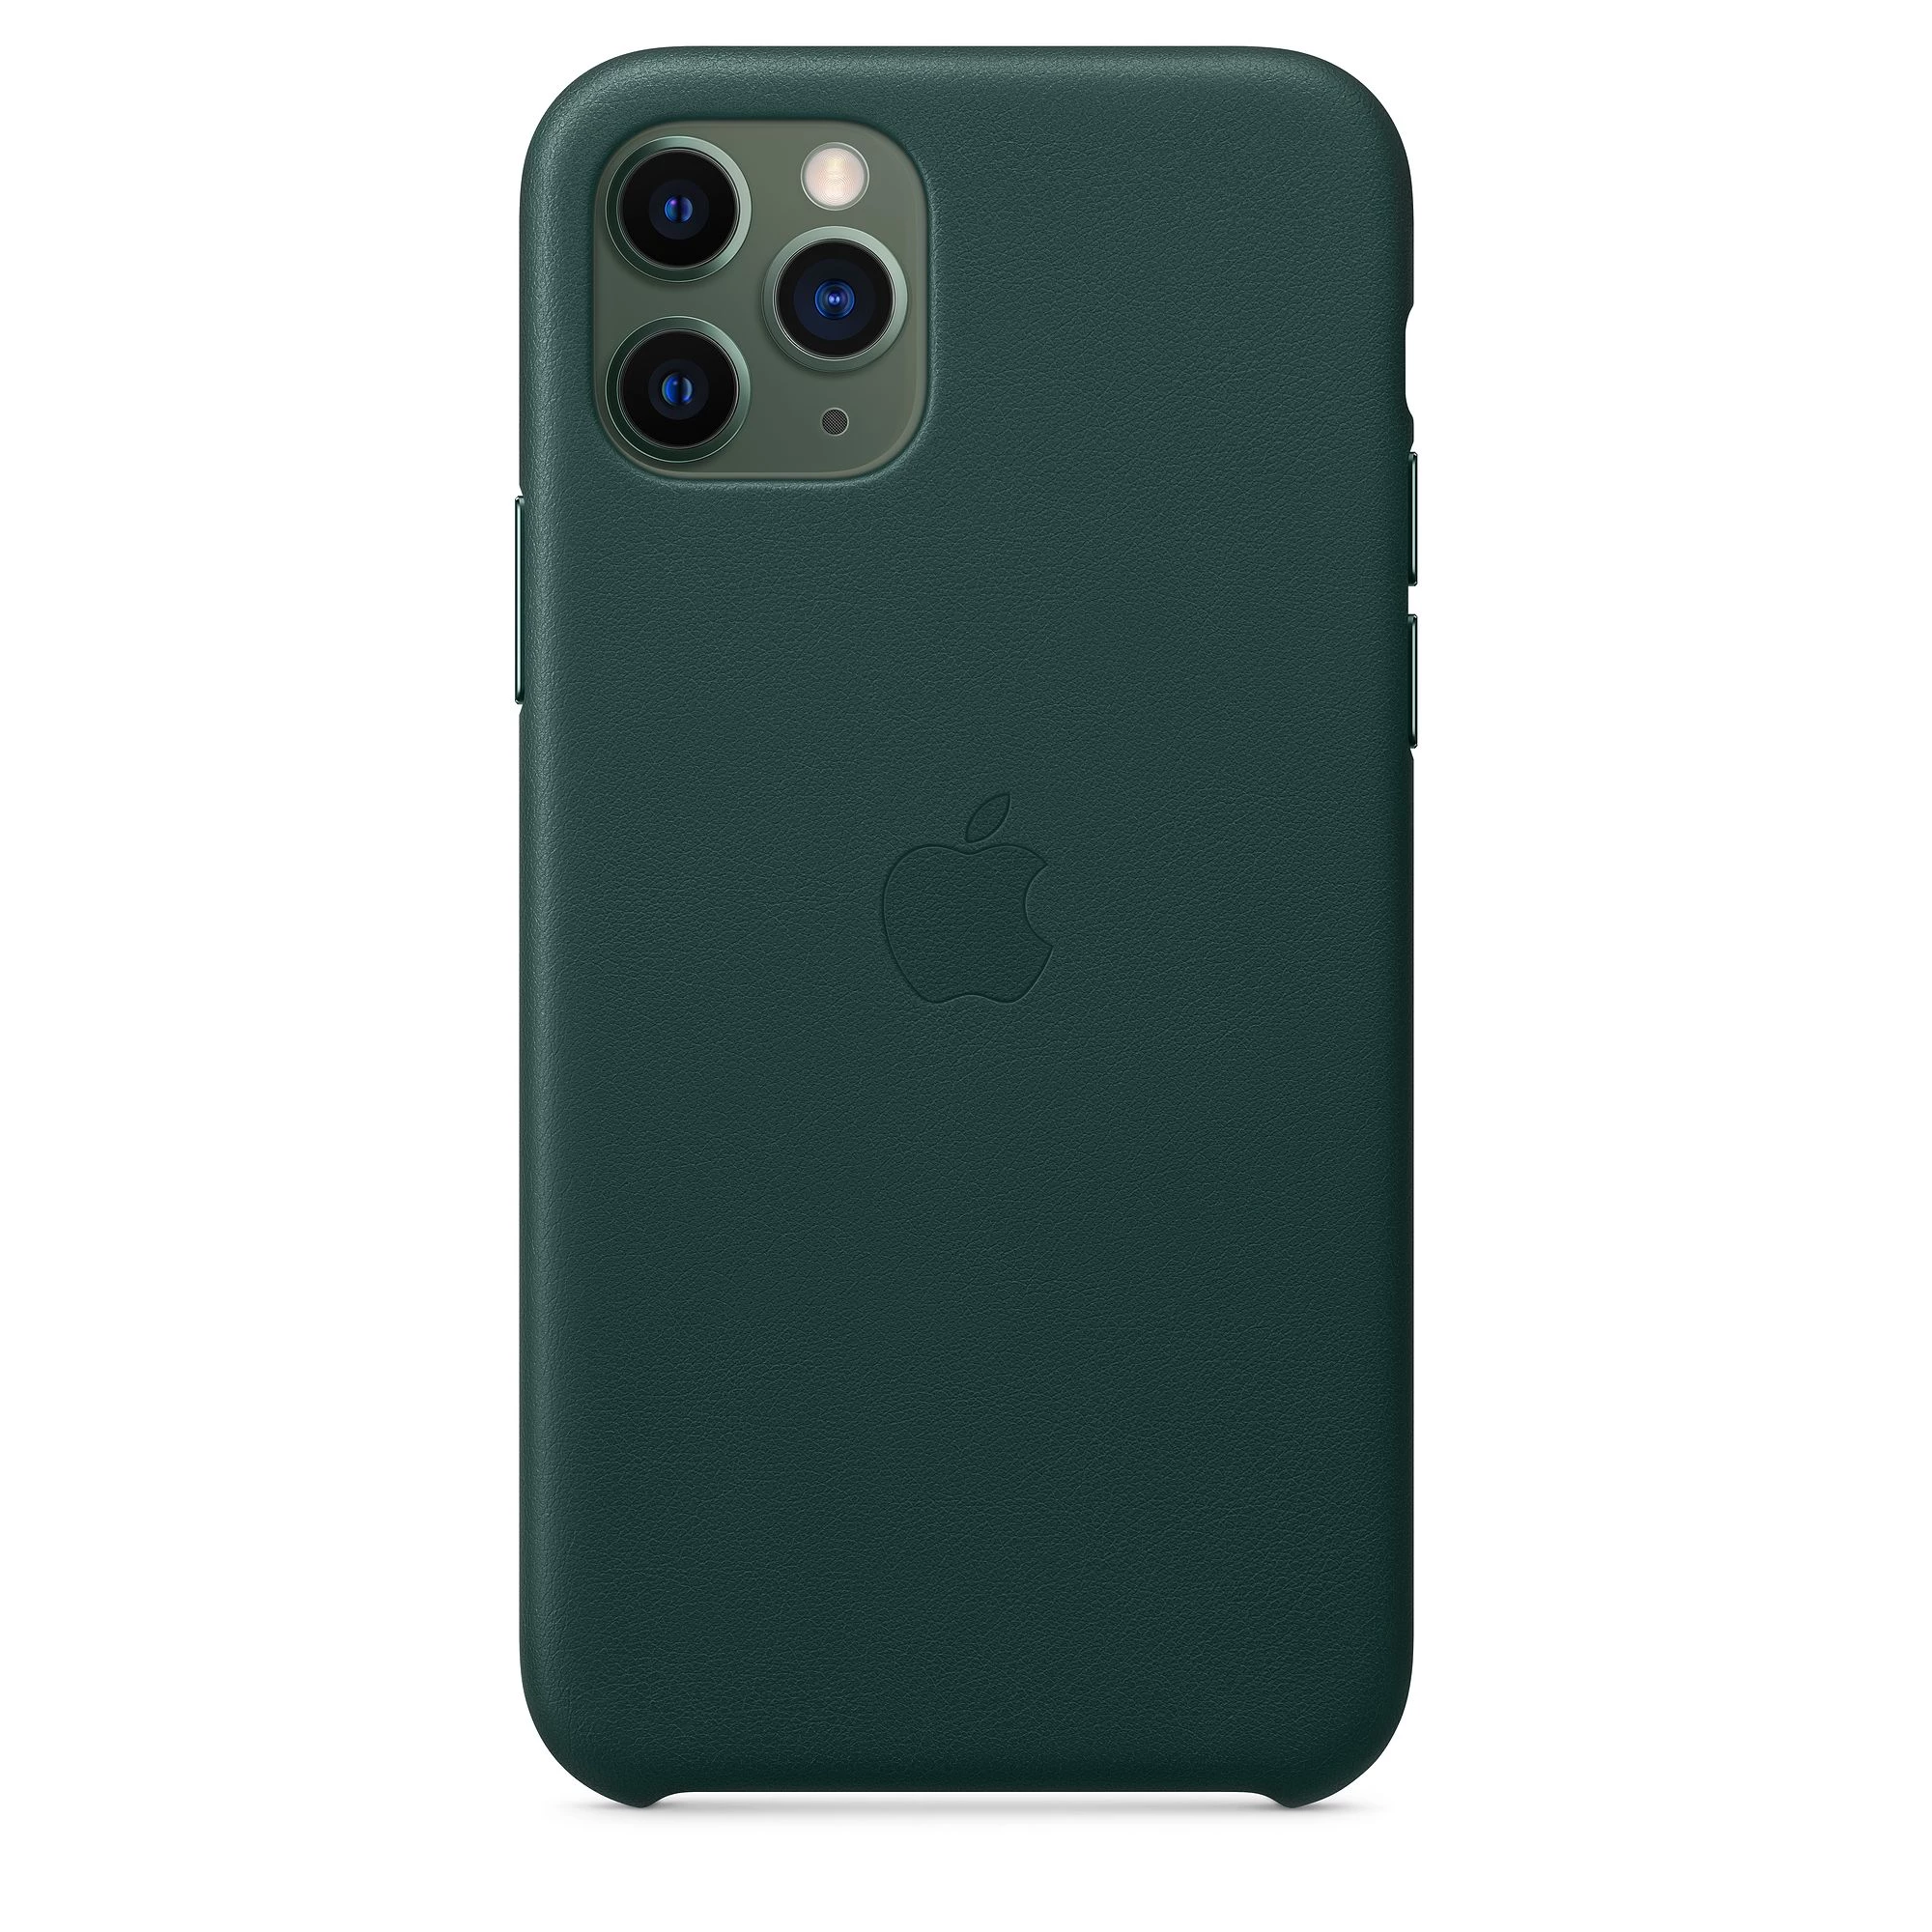 Apple iPhone 11 Pro Max Leather Case - Forest Green (MX0C2)